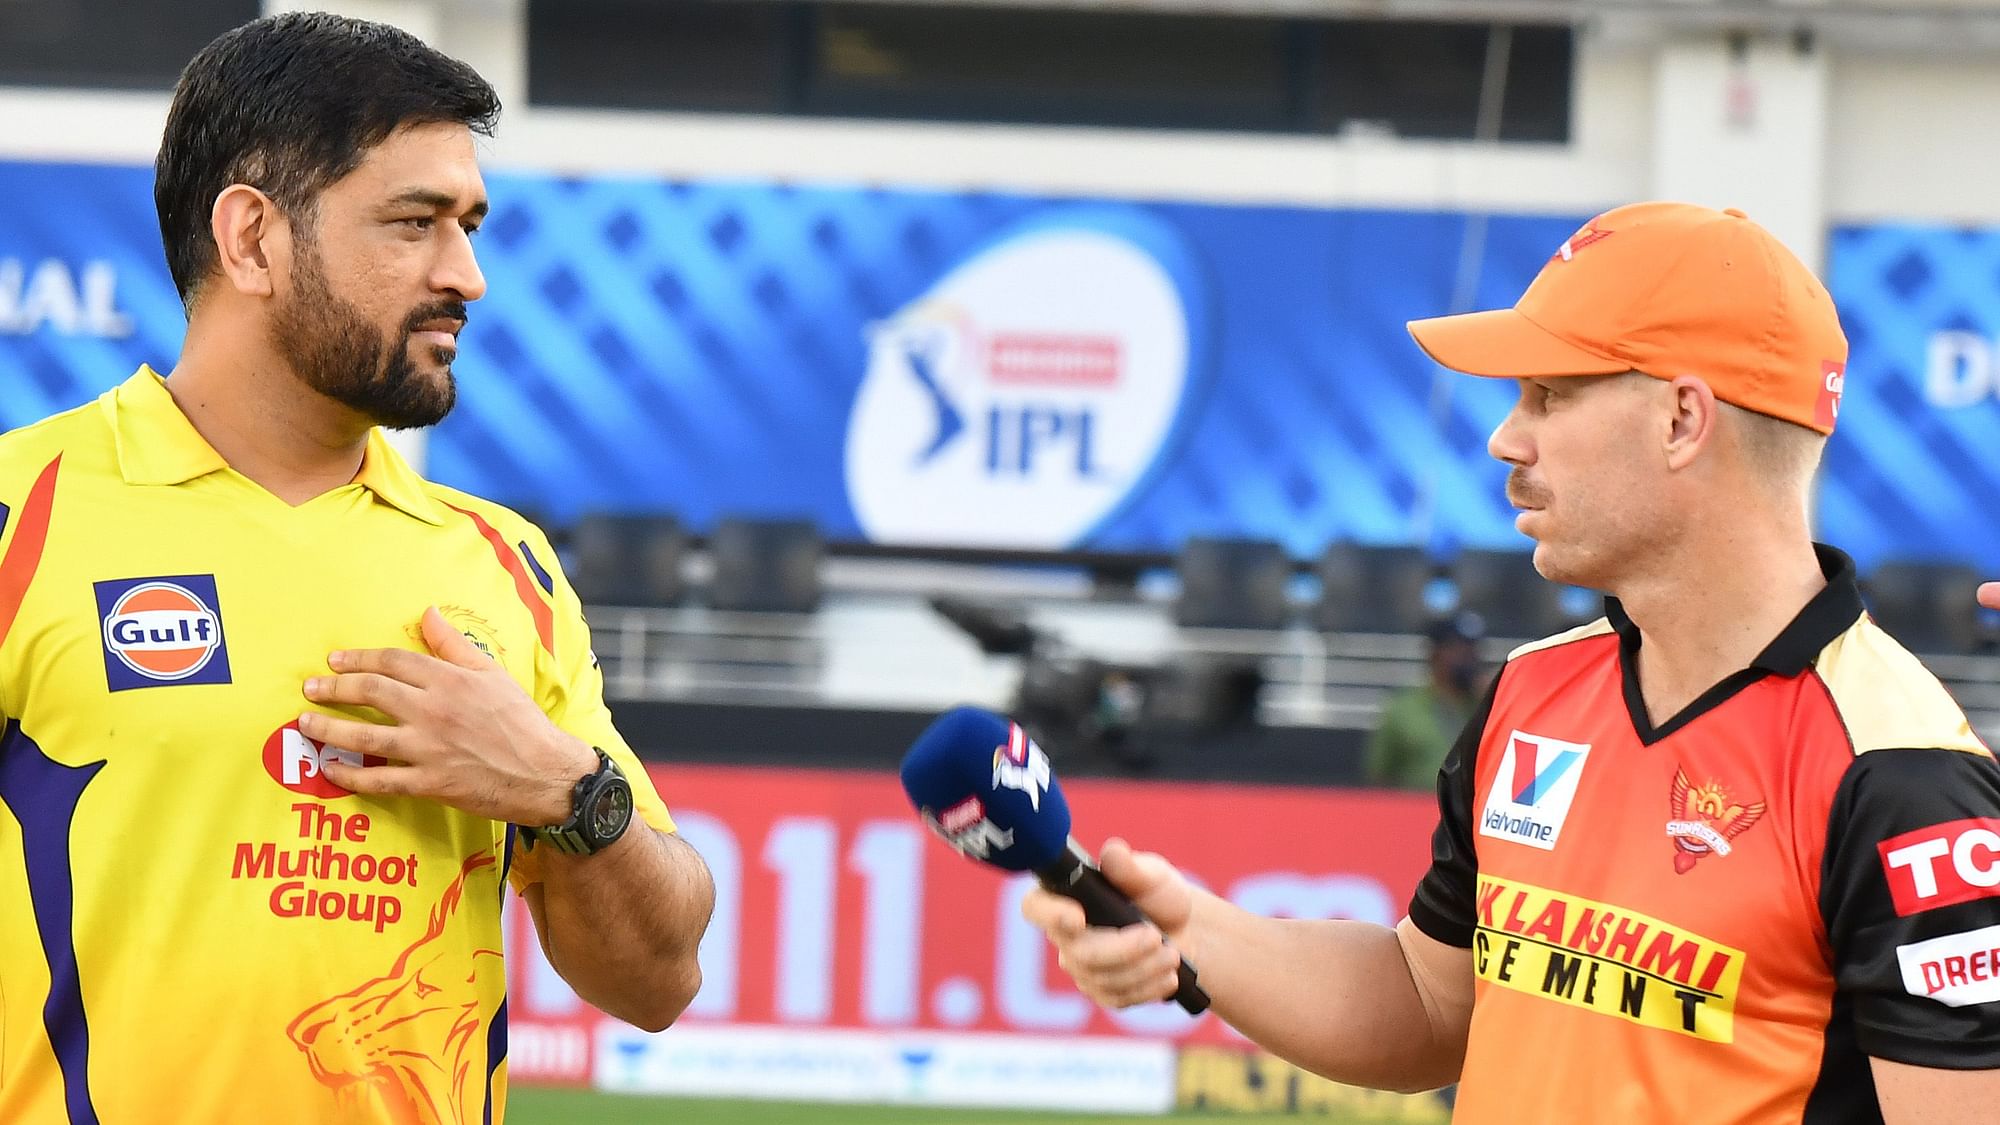 Chennai Super Kings (CSK) are playing Sunrisers Hyderabad (SRH) in a return fixture of the 2020 Indian Premier League (IPL).